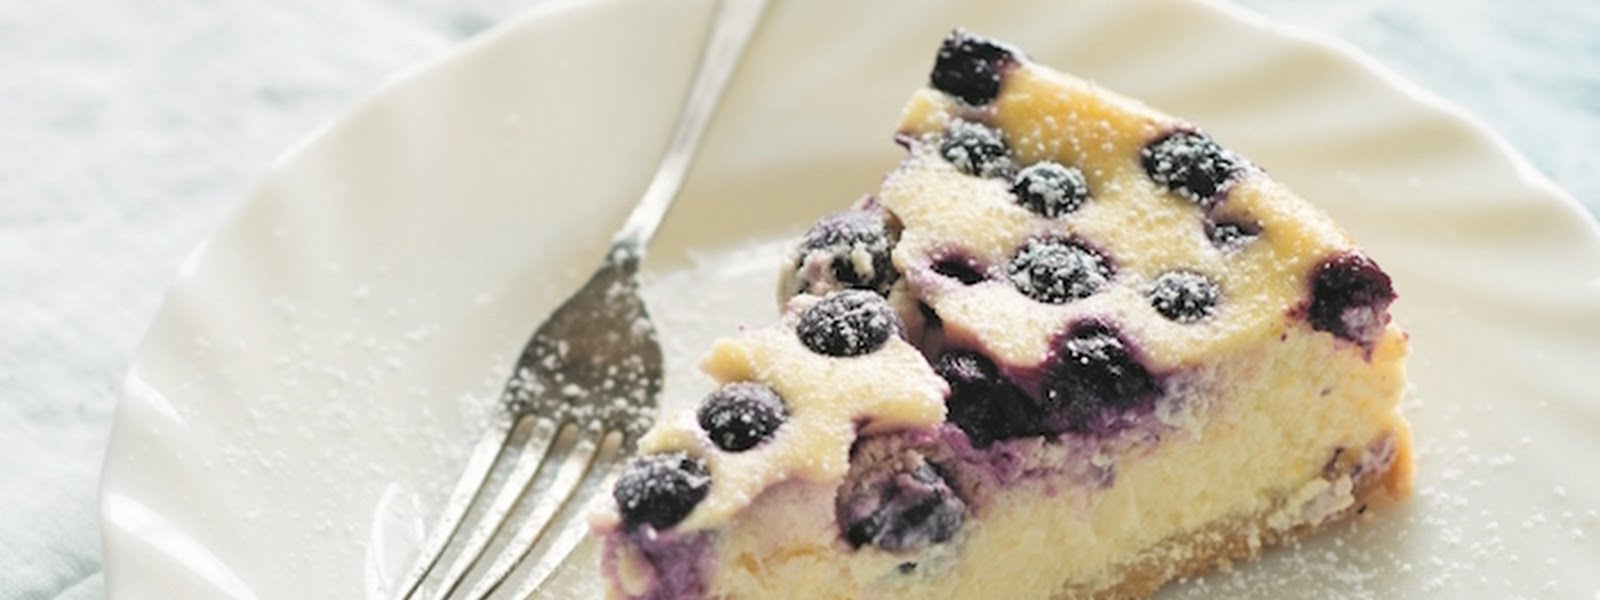 What to bake this weekend: Lemon and blueberry cheesecake